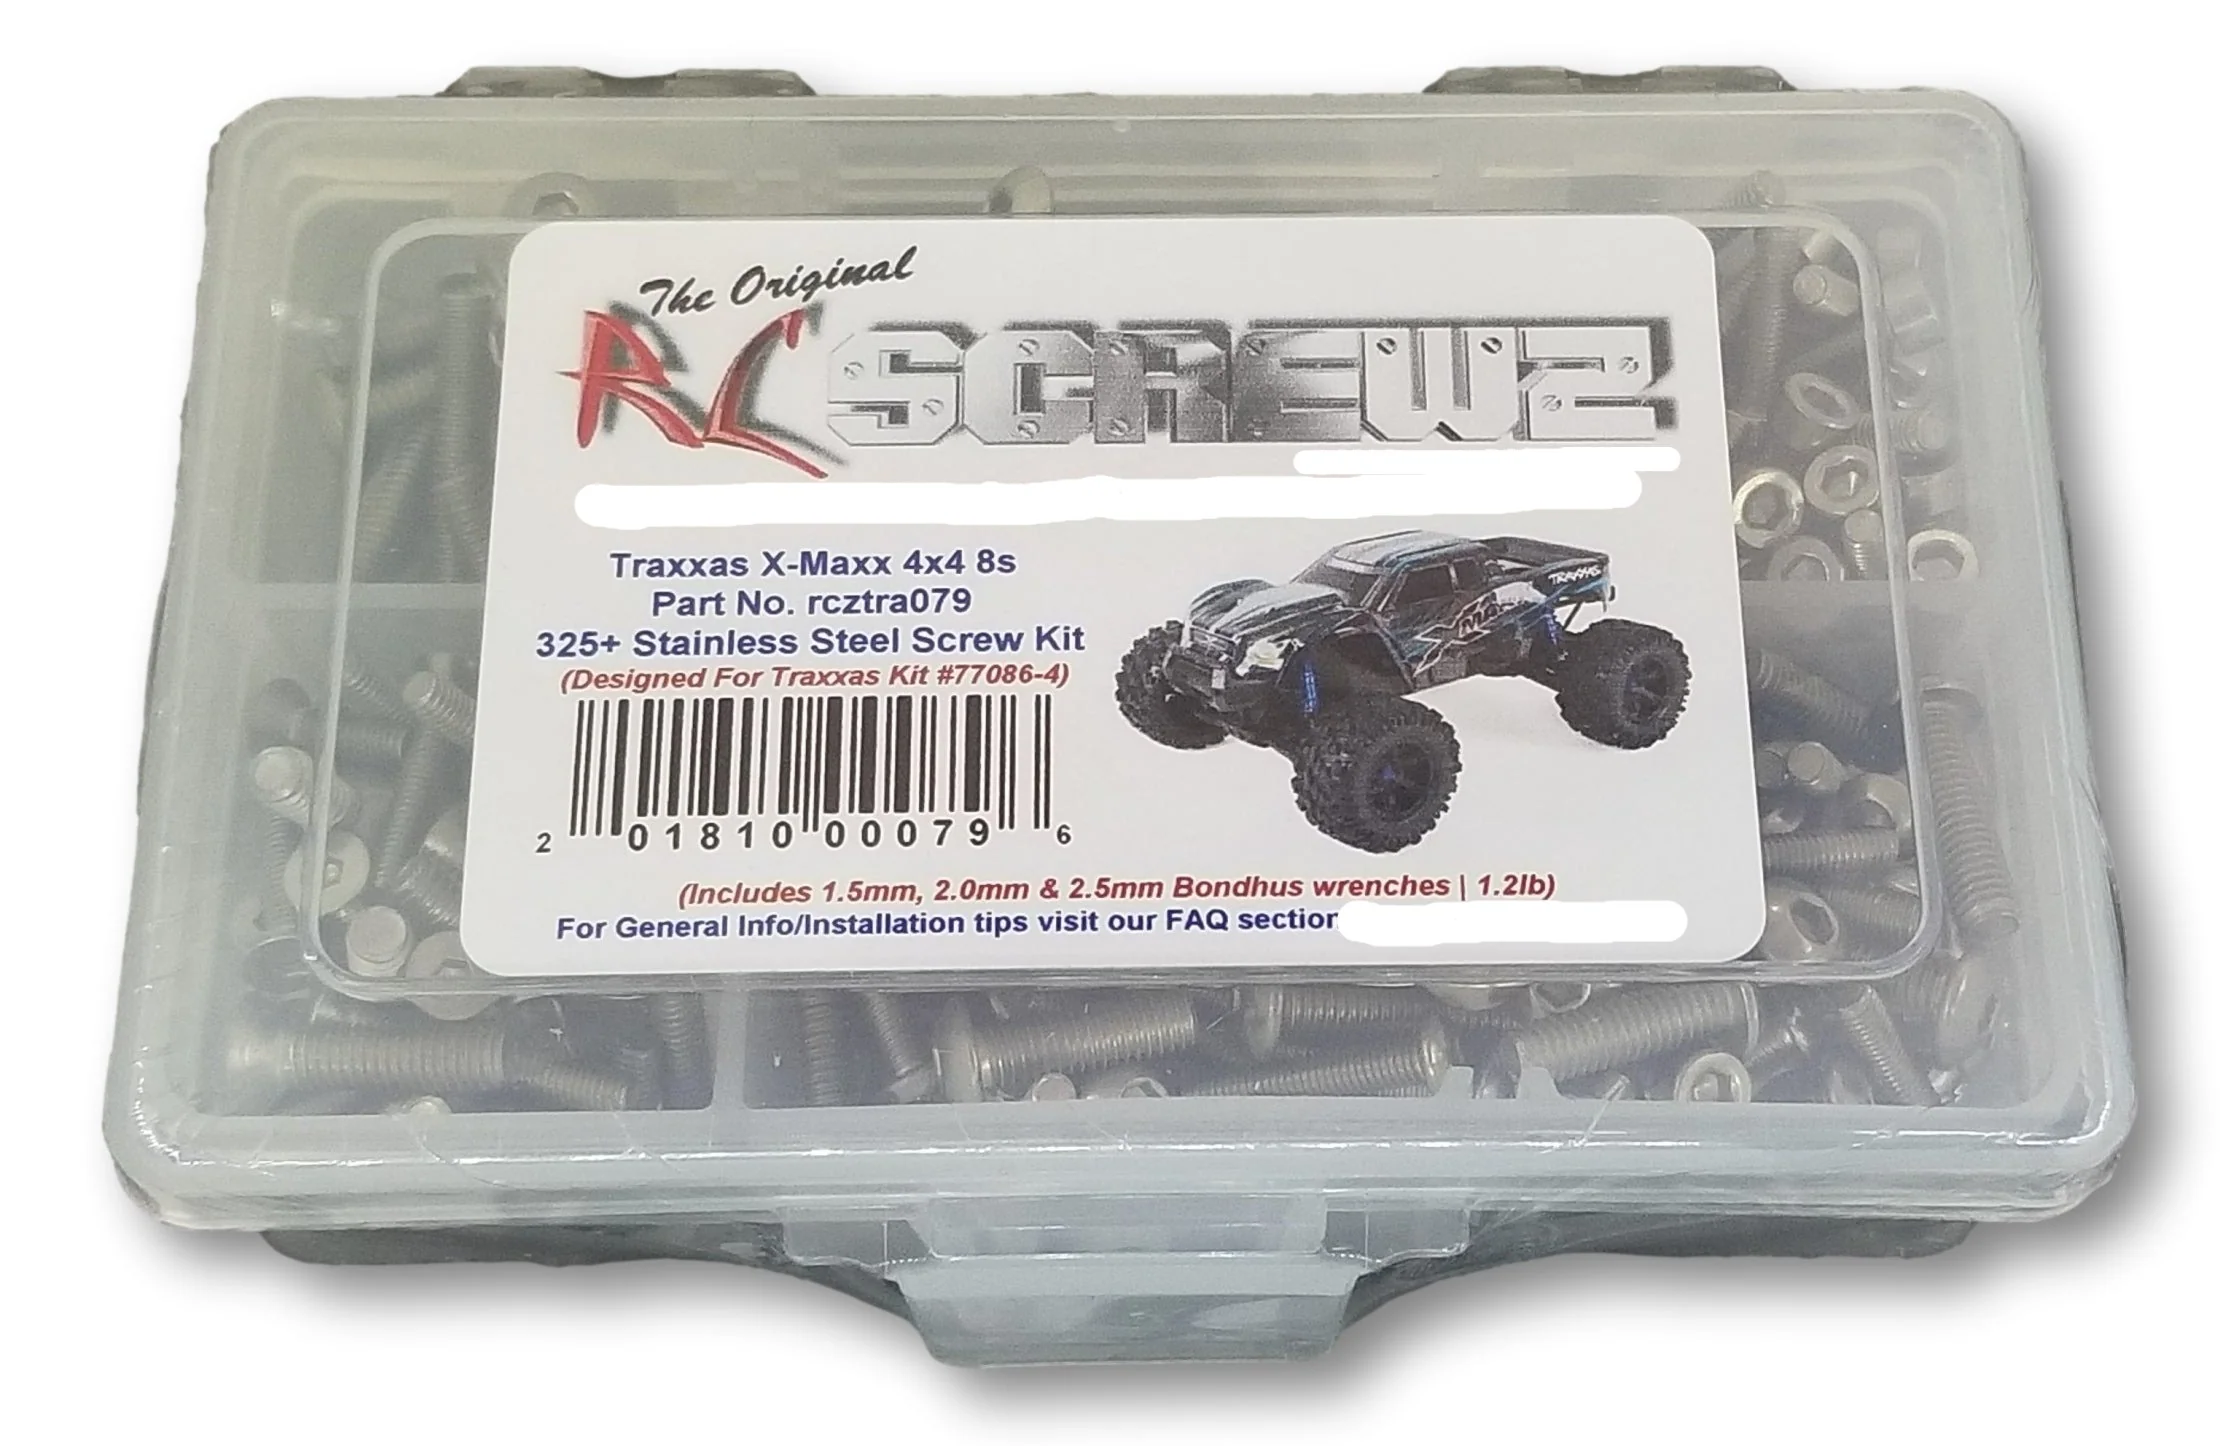 RCScrewZ Stainless Steel Screw Kit tra079 for Traxxas X-Maxx 8s #77086-4 - Picture 12 of 12